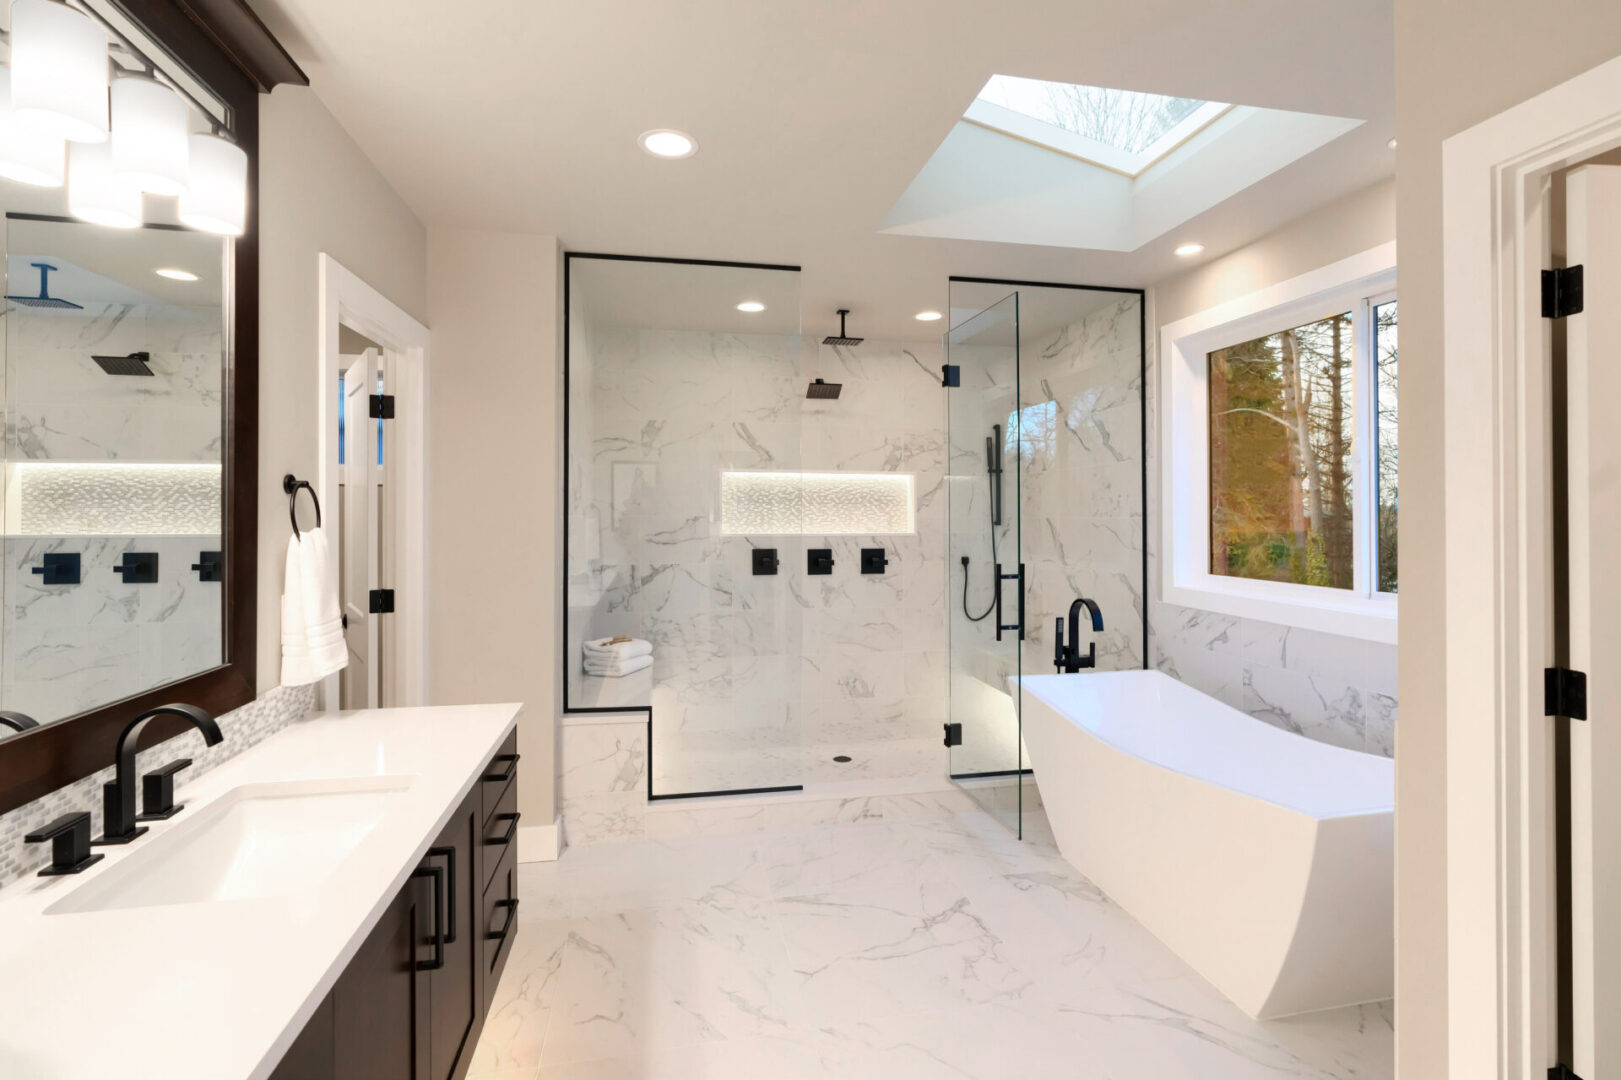 A bathroom with a large walk in shower and a bathtub.